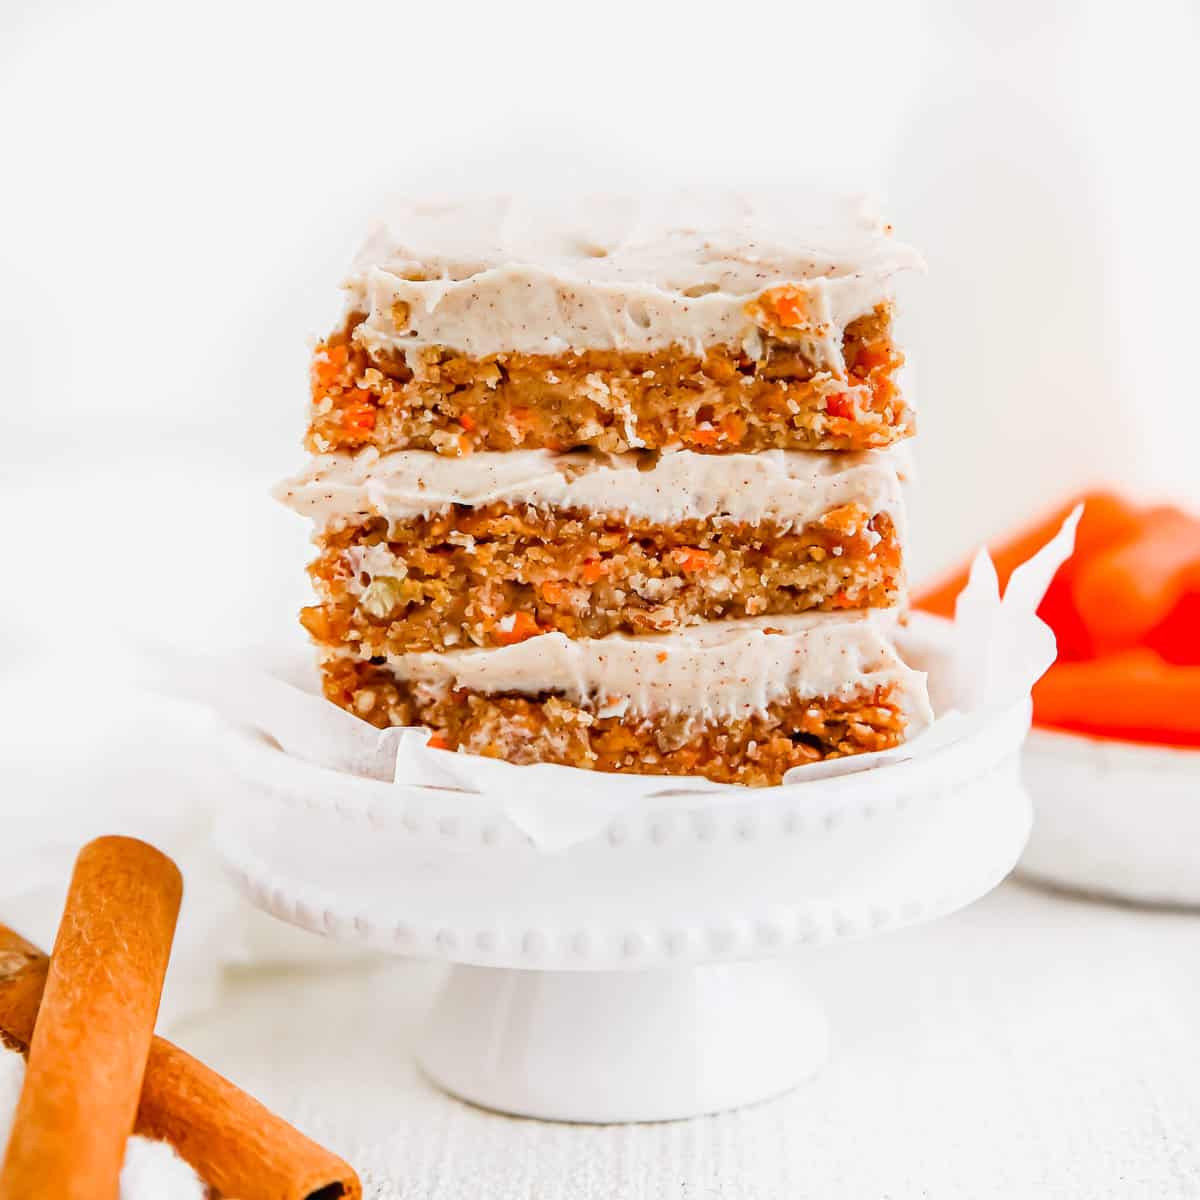 A stack of no bake carrot cake bars with cream cheese frosting